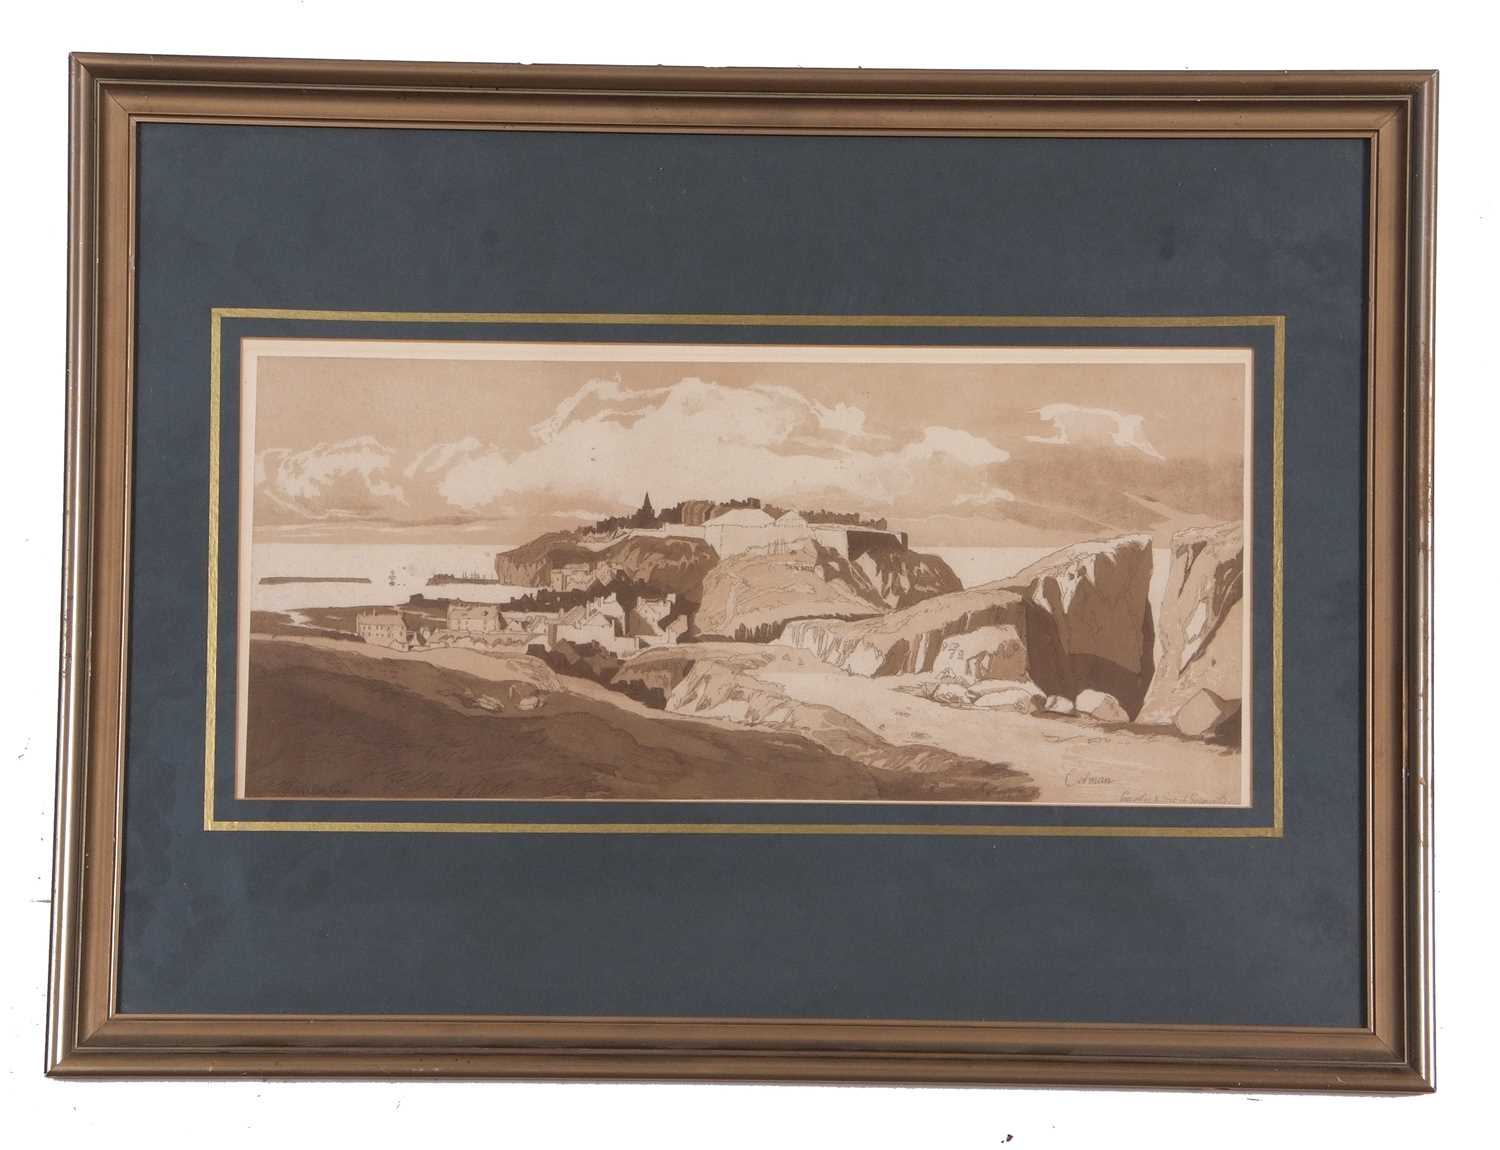 Attributed to John Sell Cotman (1814-1878), 'Granville', pencil sketch on paper, unsigned, 20x41. - Image 4 of 5